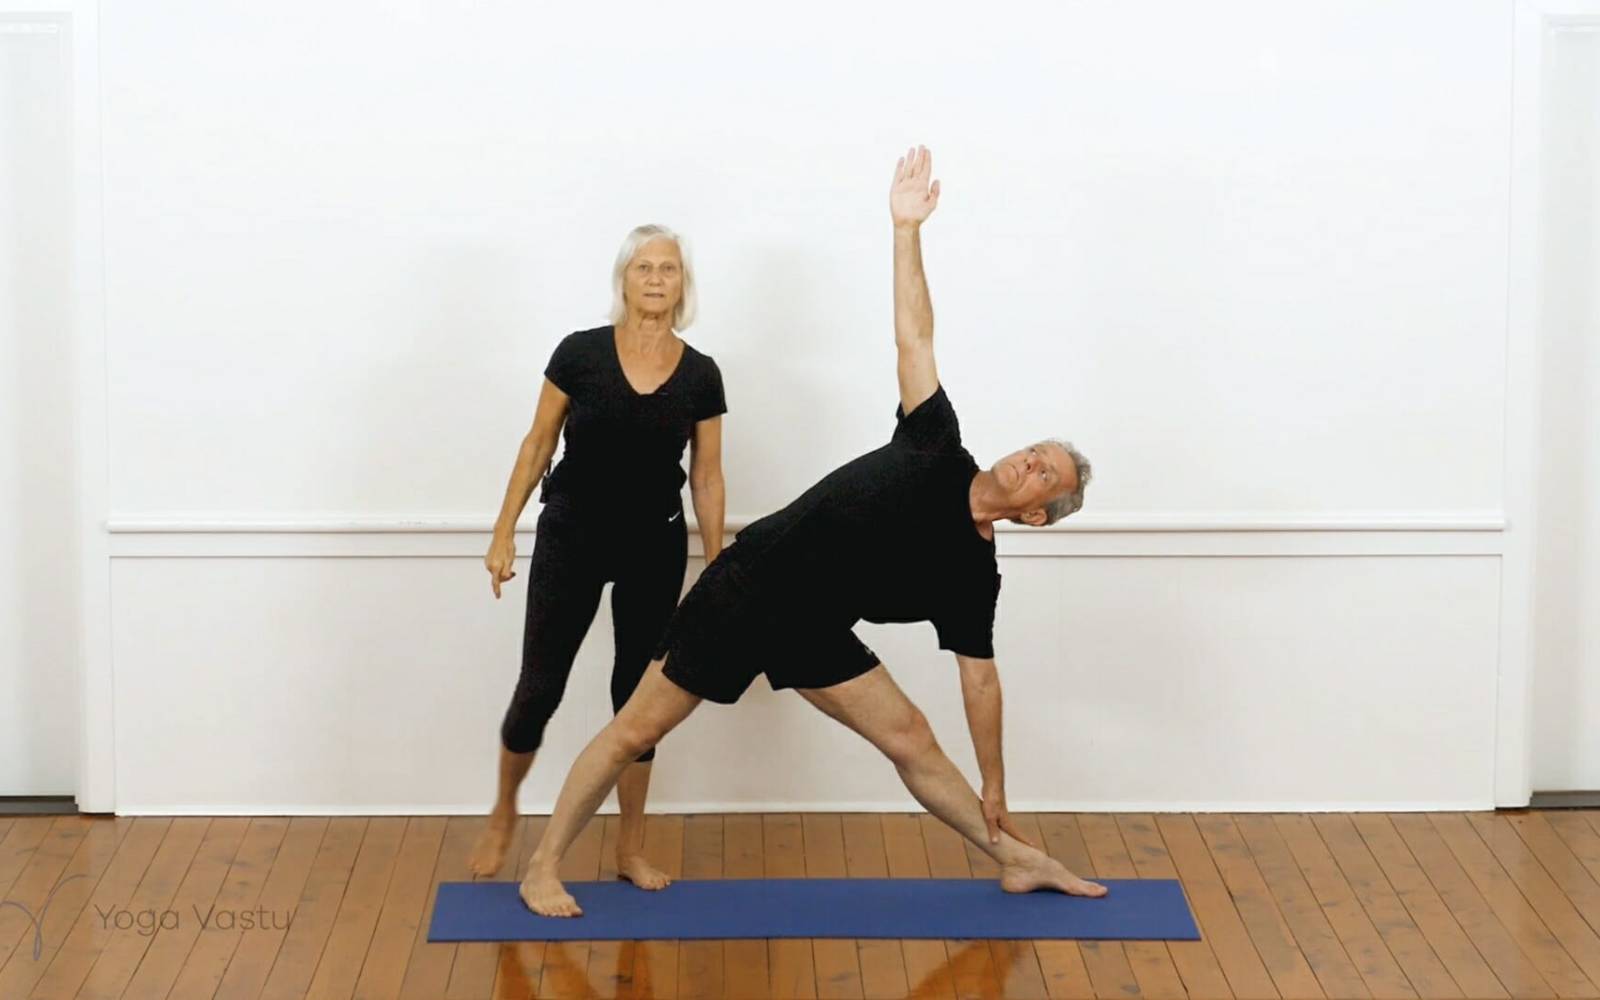 Tummee.com - View the entire Iyengar Yoga for Senior Citizens: Beginner  Level Iyengar Yoga For Senior Citizens With Props at  yoga-sequences/iyengar-yoga-sequence-for-seniors Theme: Building confidence  while in the deep stretch